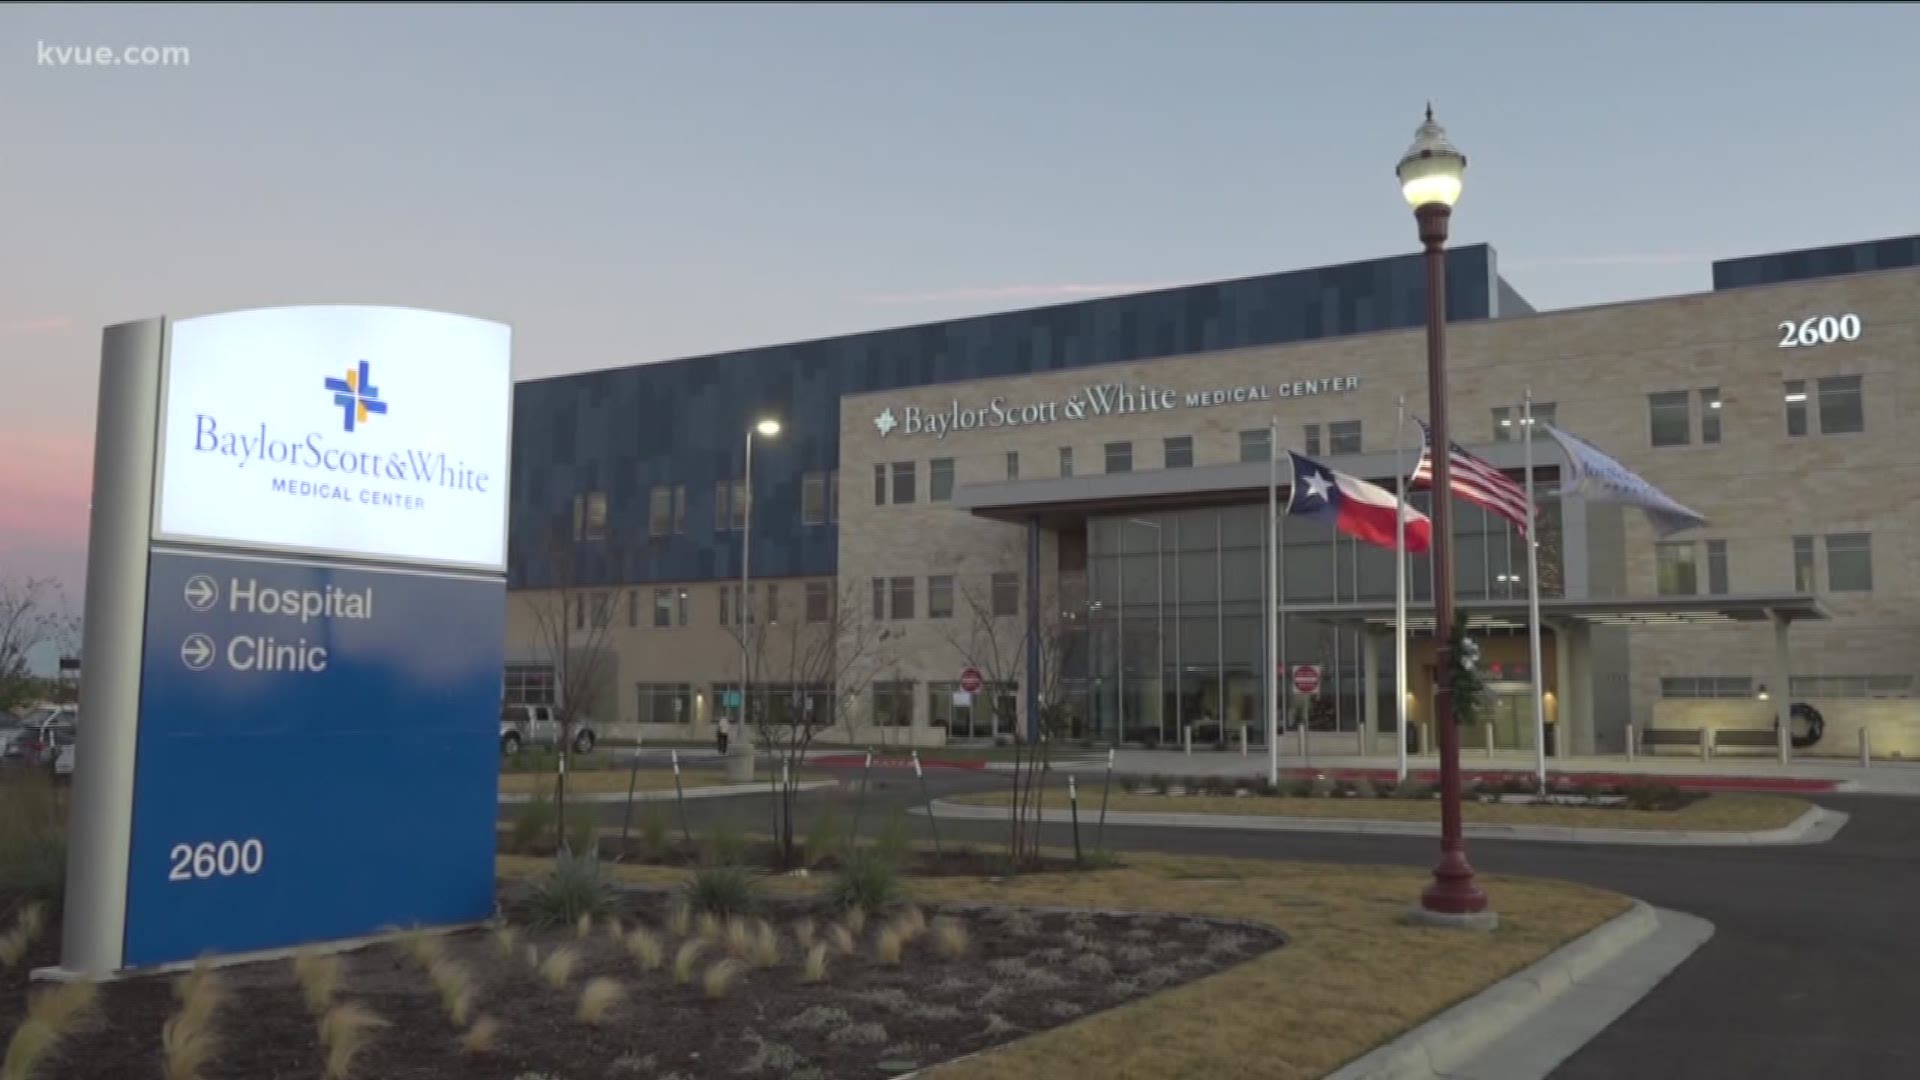 The Baylor Scott & White Medical Center - Pflugerville will be the first hospital in the city.